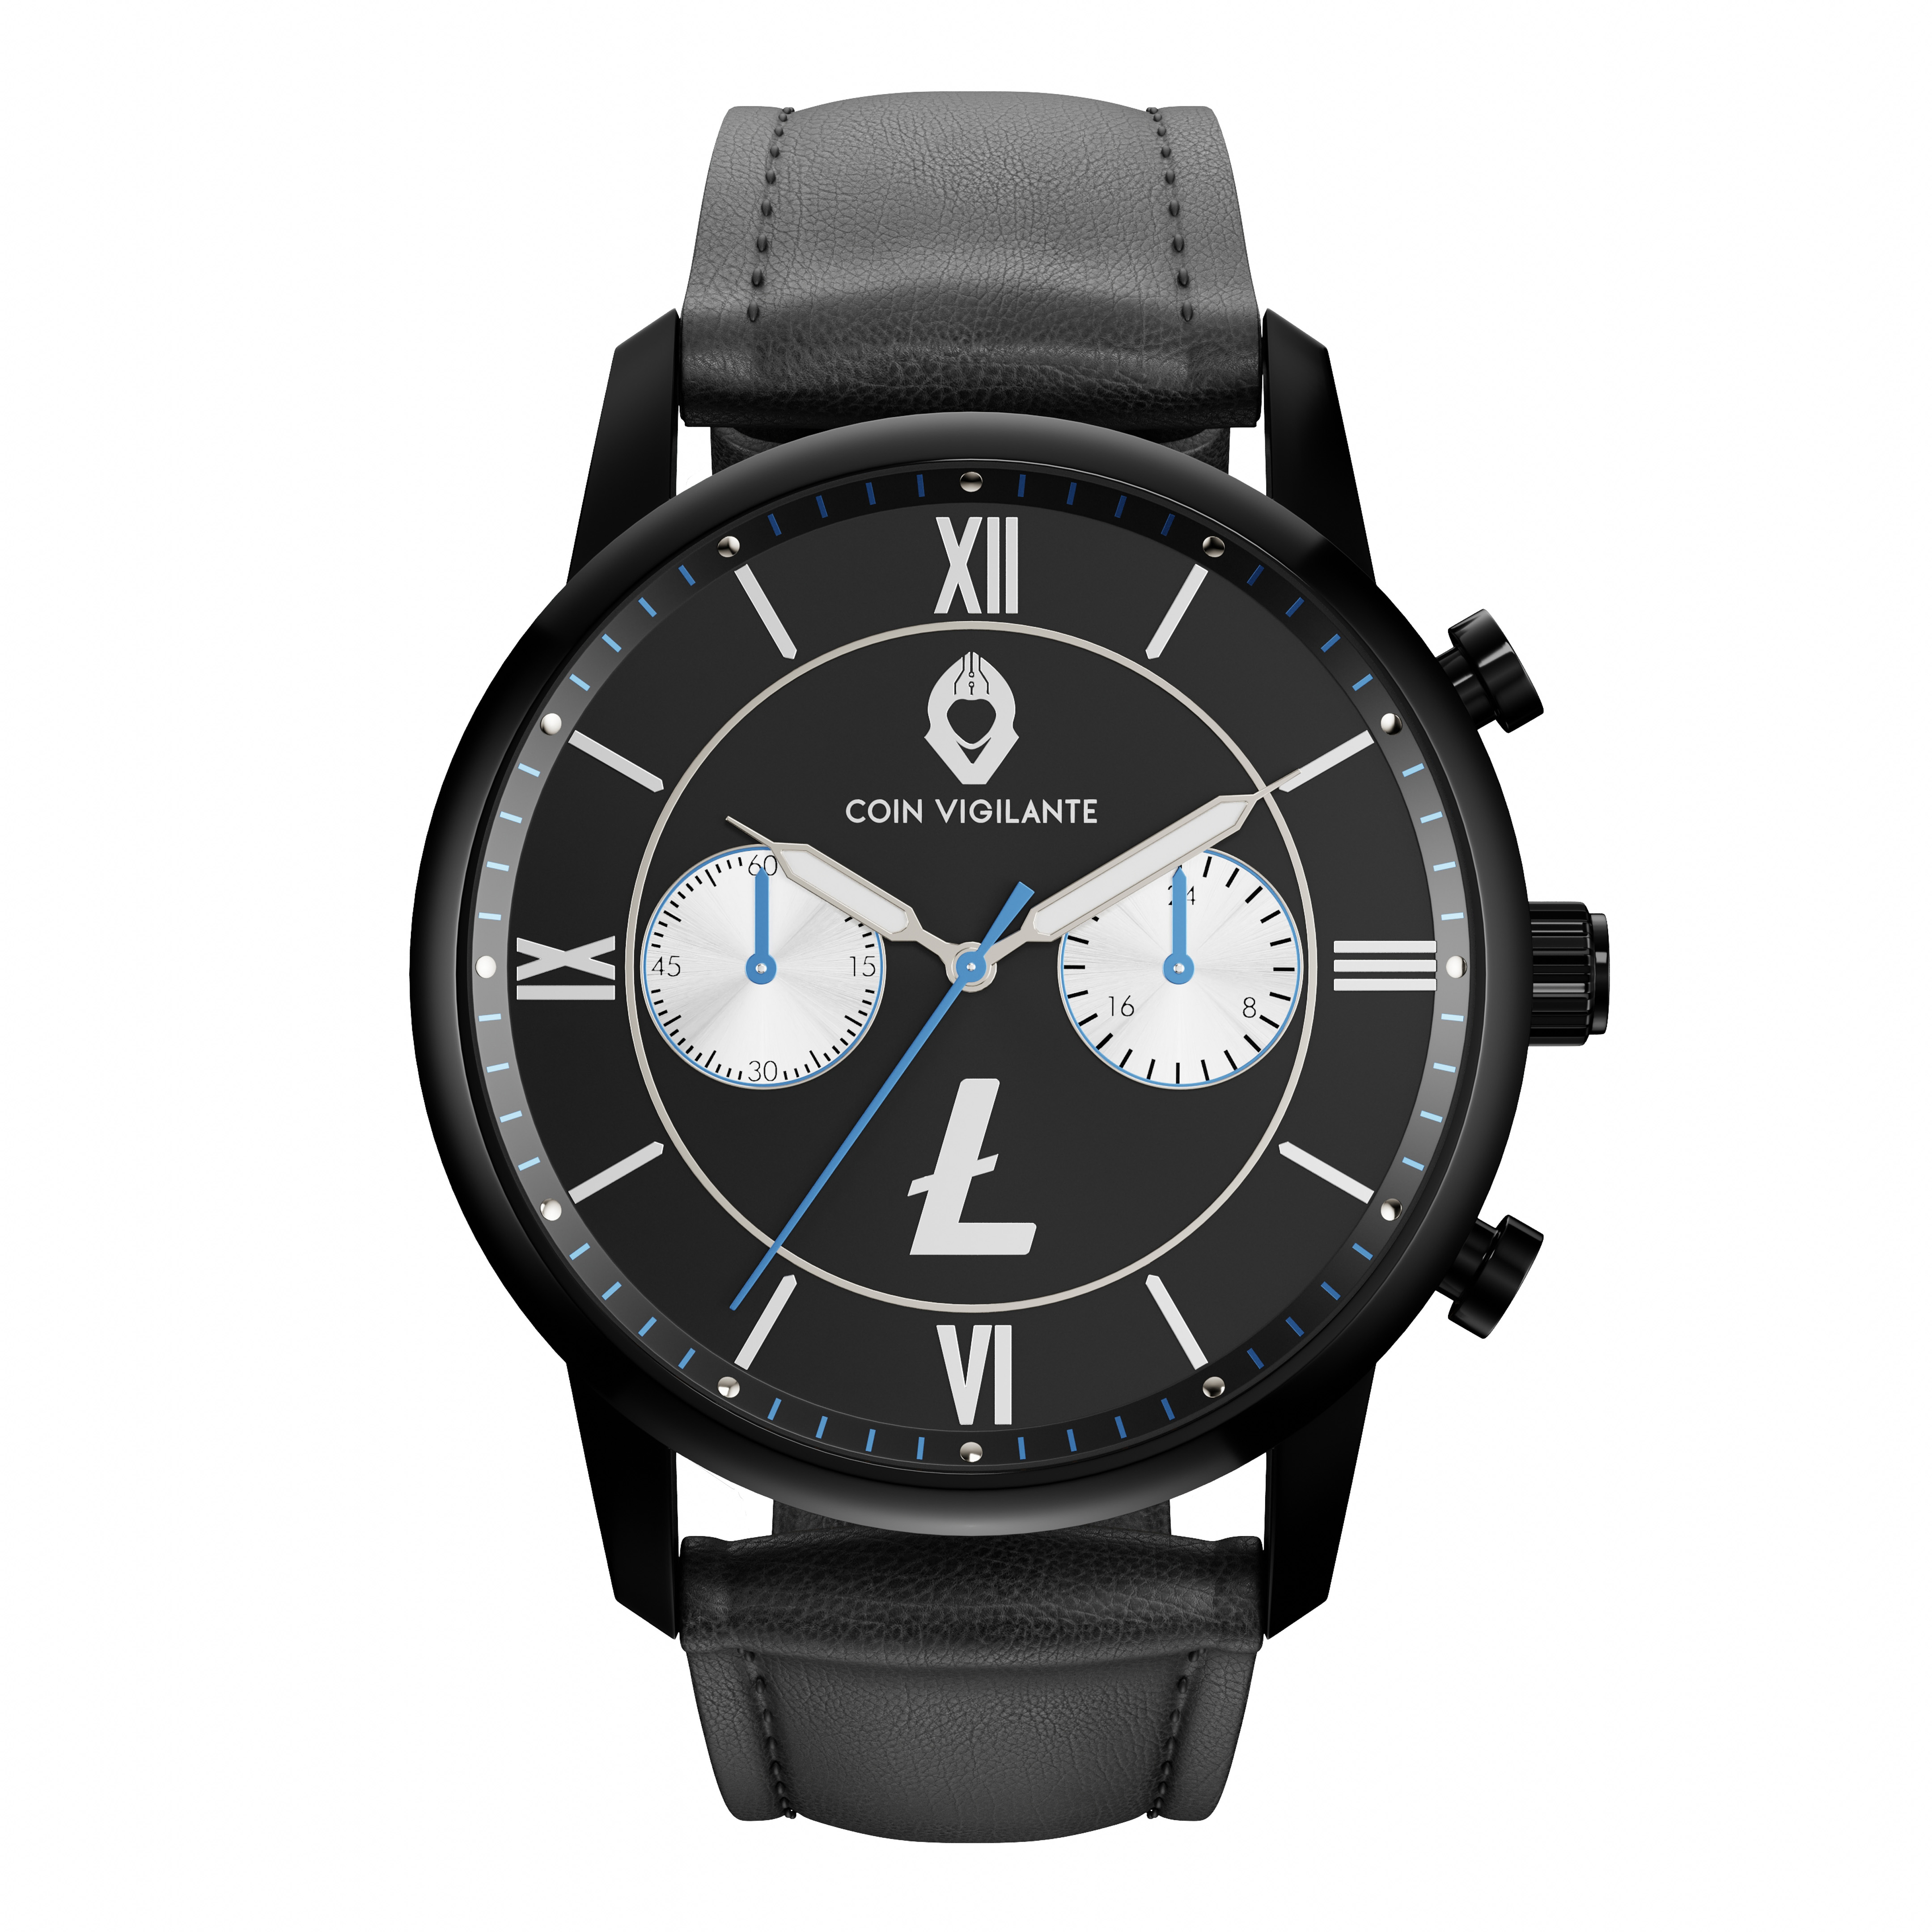 Litecoin Watch Model G - First Limited Edition (Only 750 in existence)